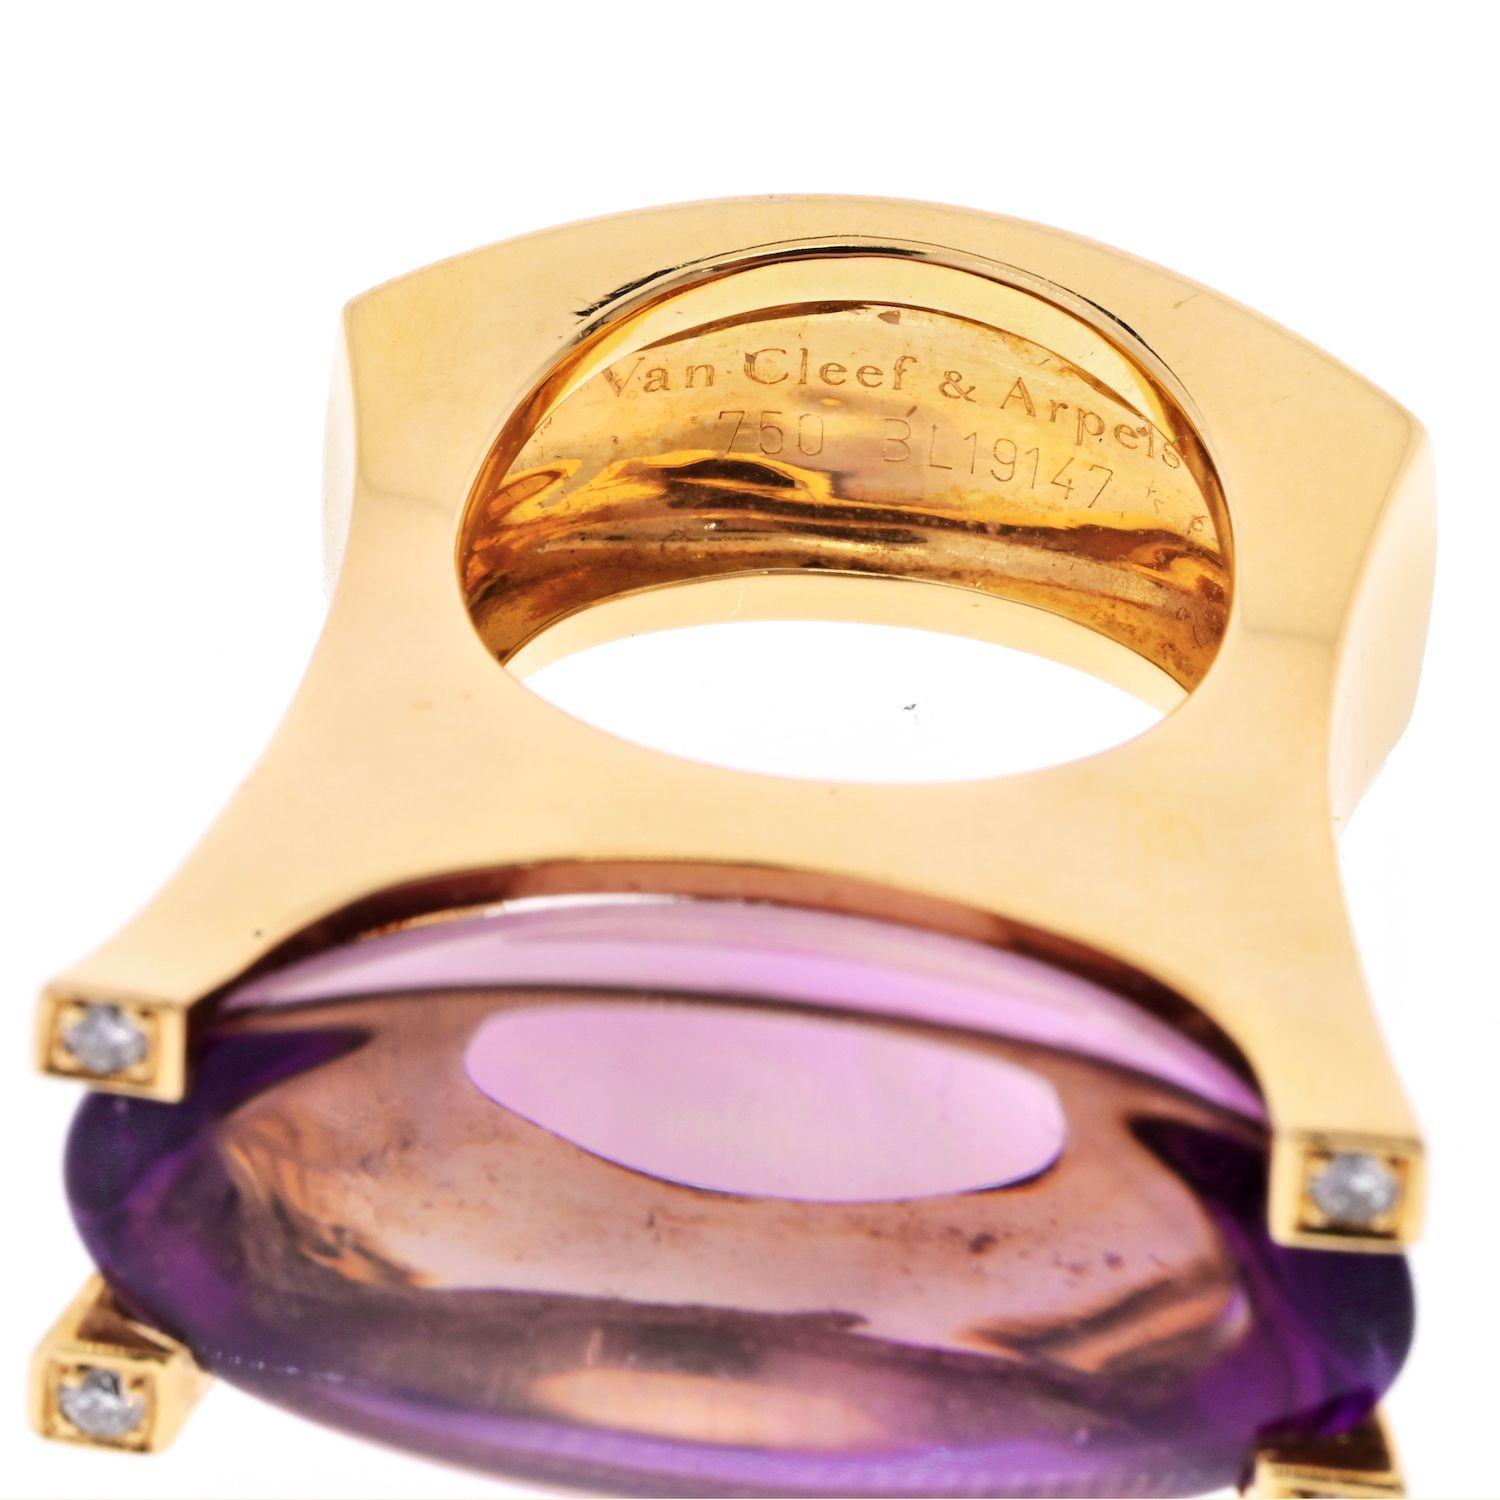 We are delighted to have this model back in stock: Van Cleef and Arpels cocktail ring featuring a vivid amethyst encased by 4 of the finest Van Cleef and Arpels round brilliant cut diamonds in 18k yellow gold. 4 round brilliant cut diamonds of VVS1